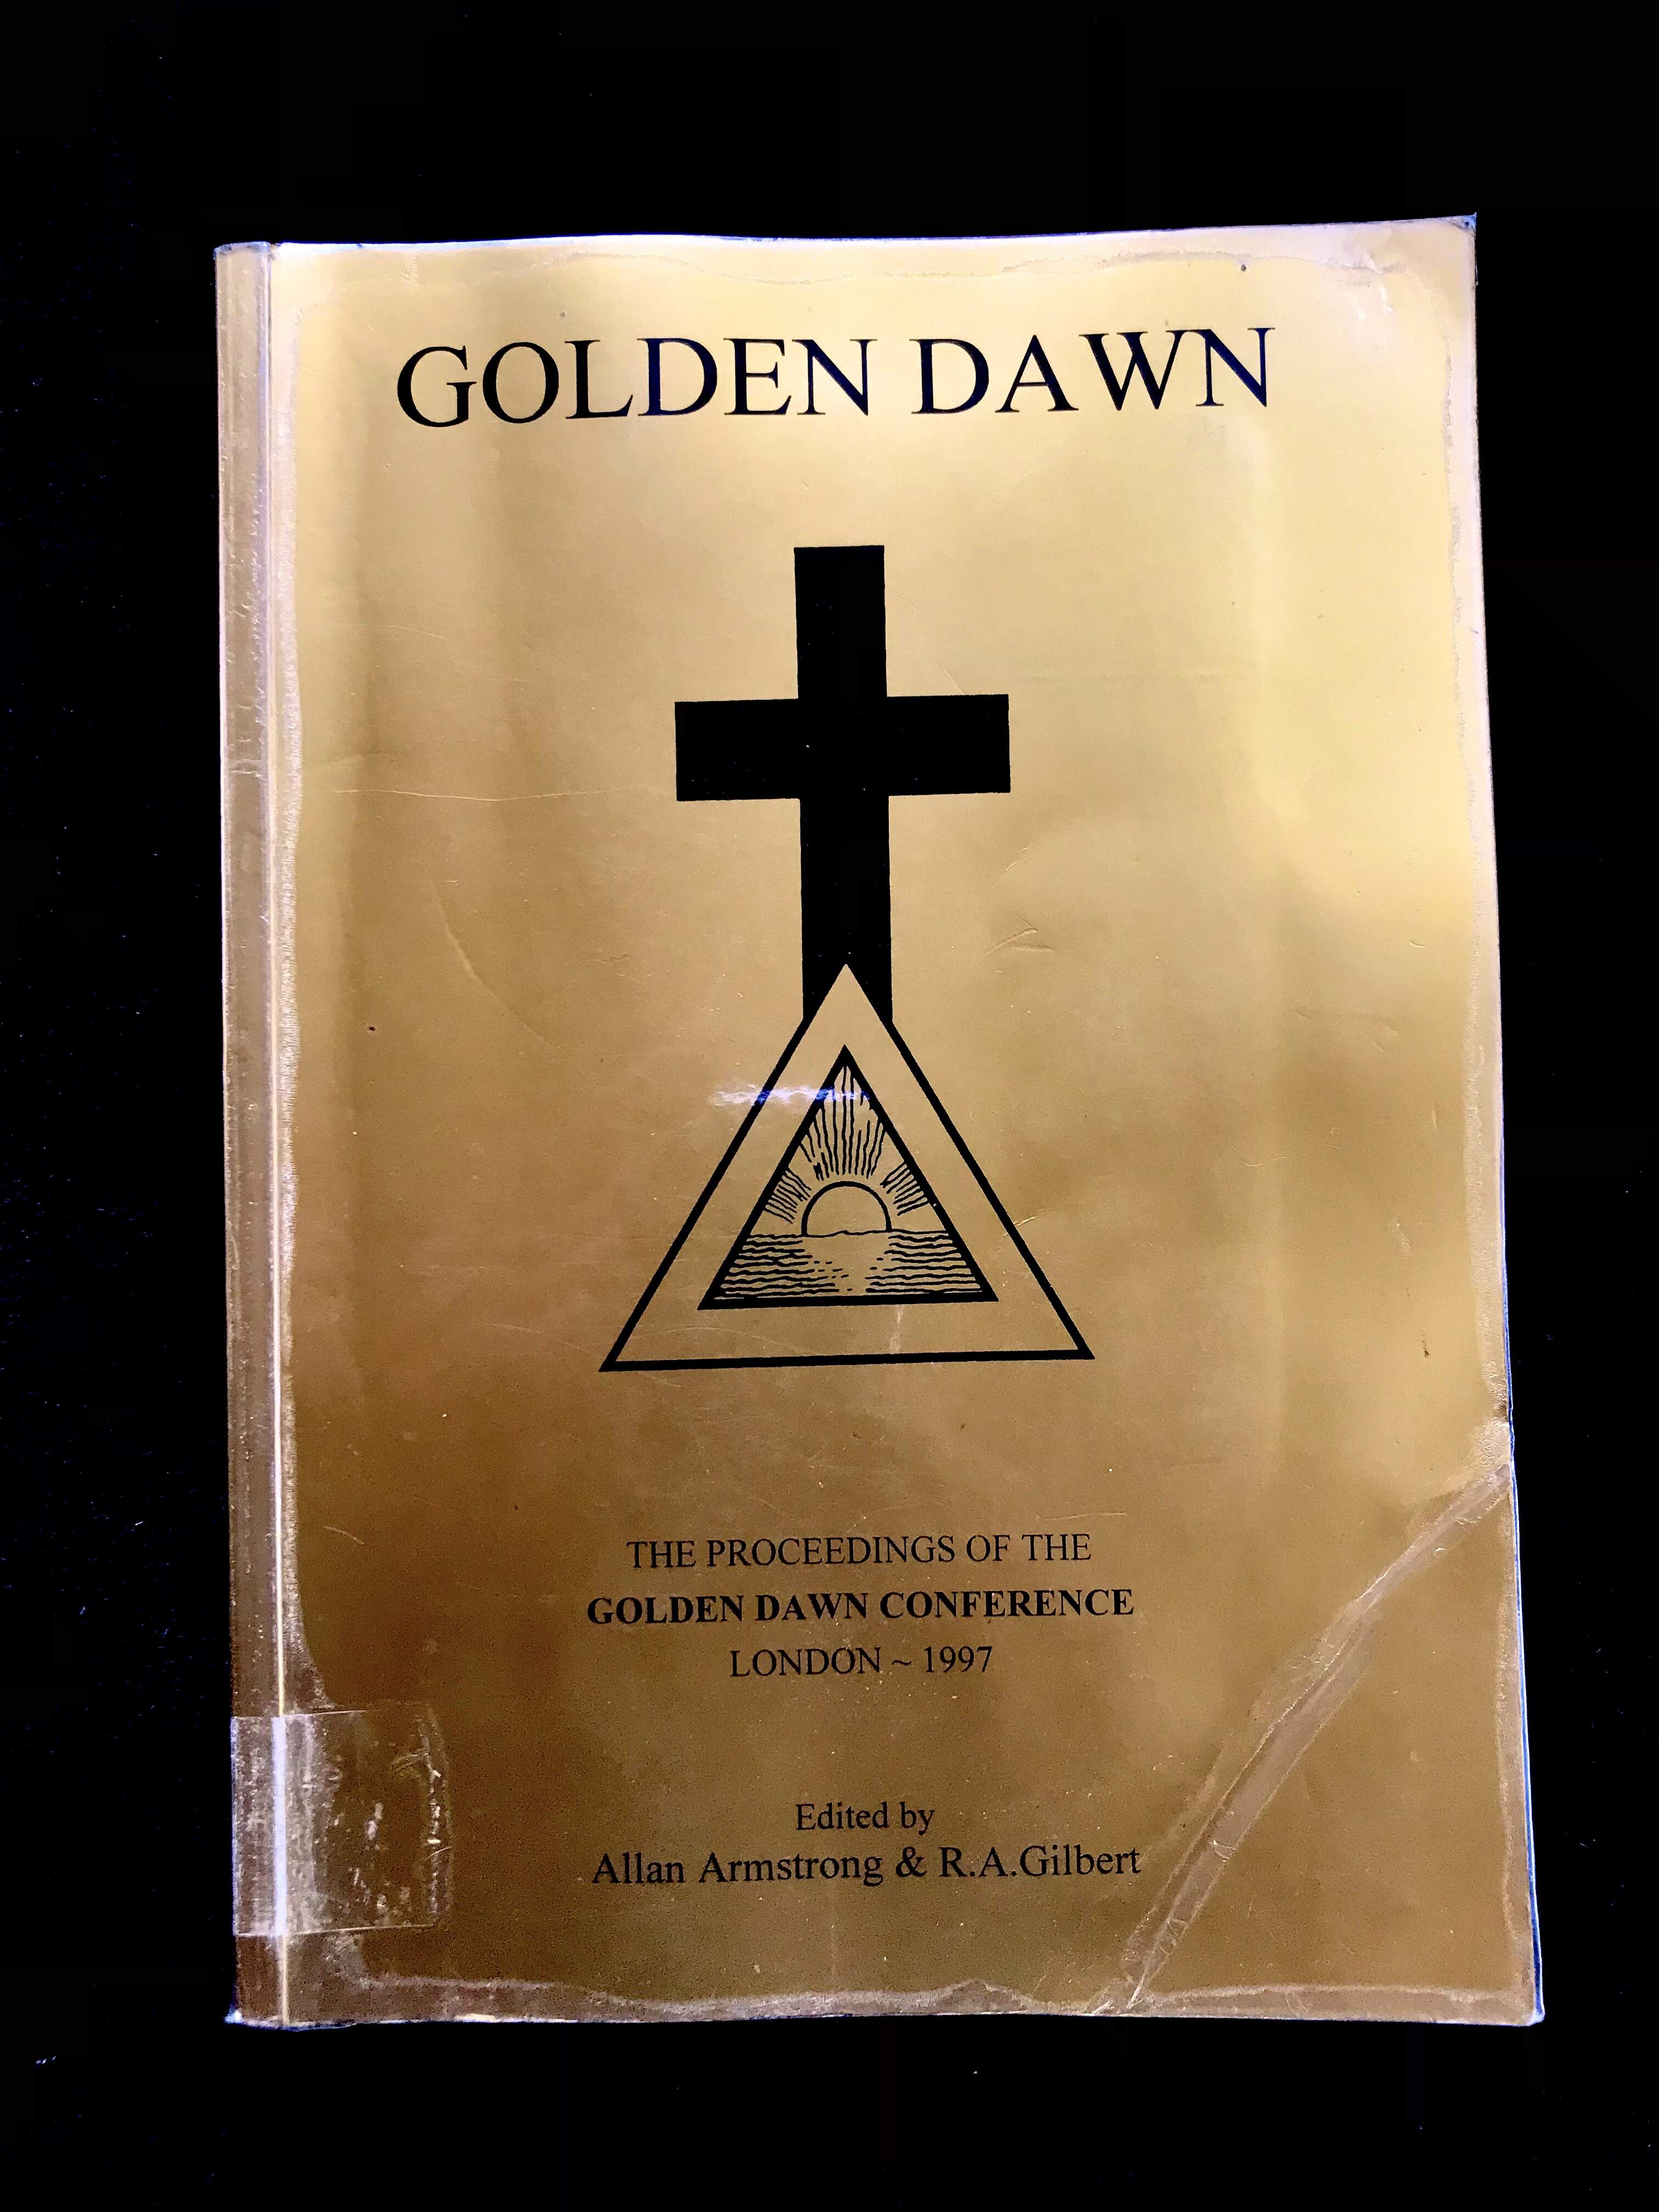 The Proceedings of the Golden Dawn Conference, London 1997.